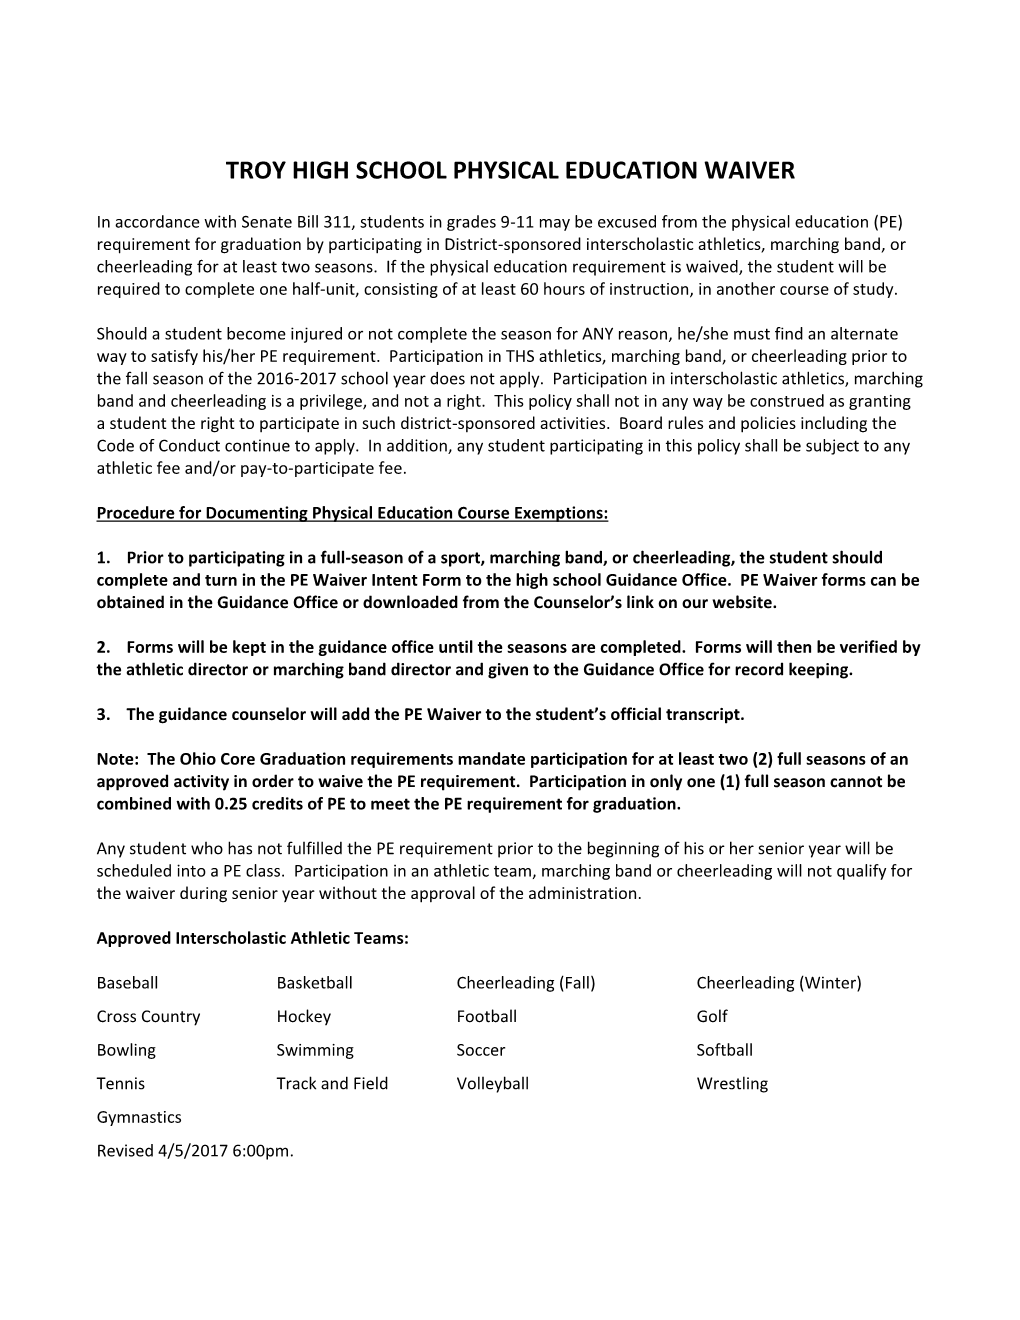 Troy High School Physical Education Waiver